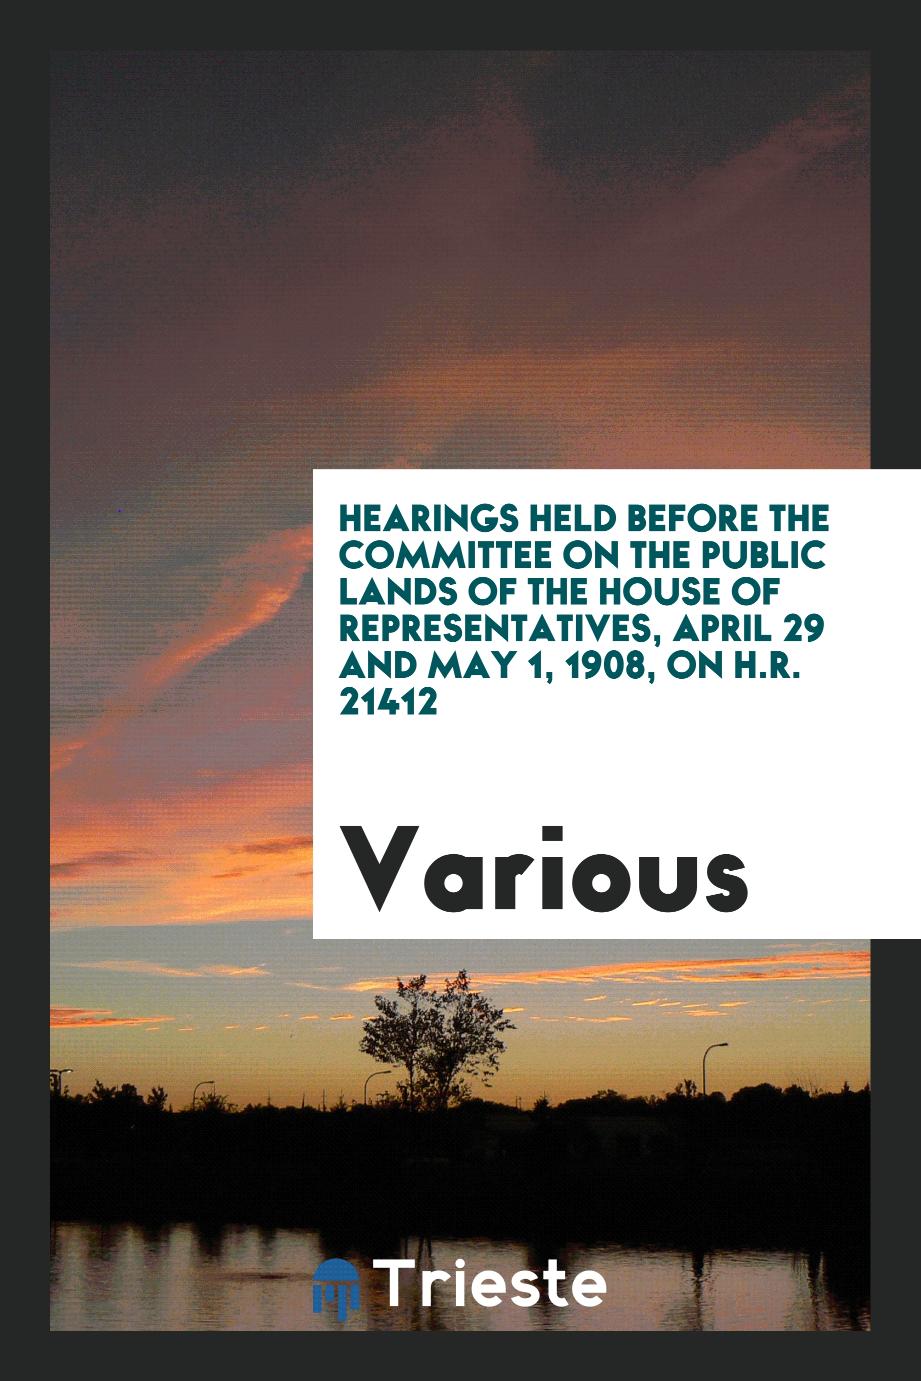 Hearings held before the Committee on the Public Lands of the House of Representatives, April 29 and May 1, 1908, on H.R. 21412